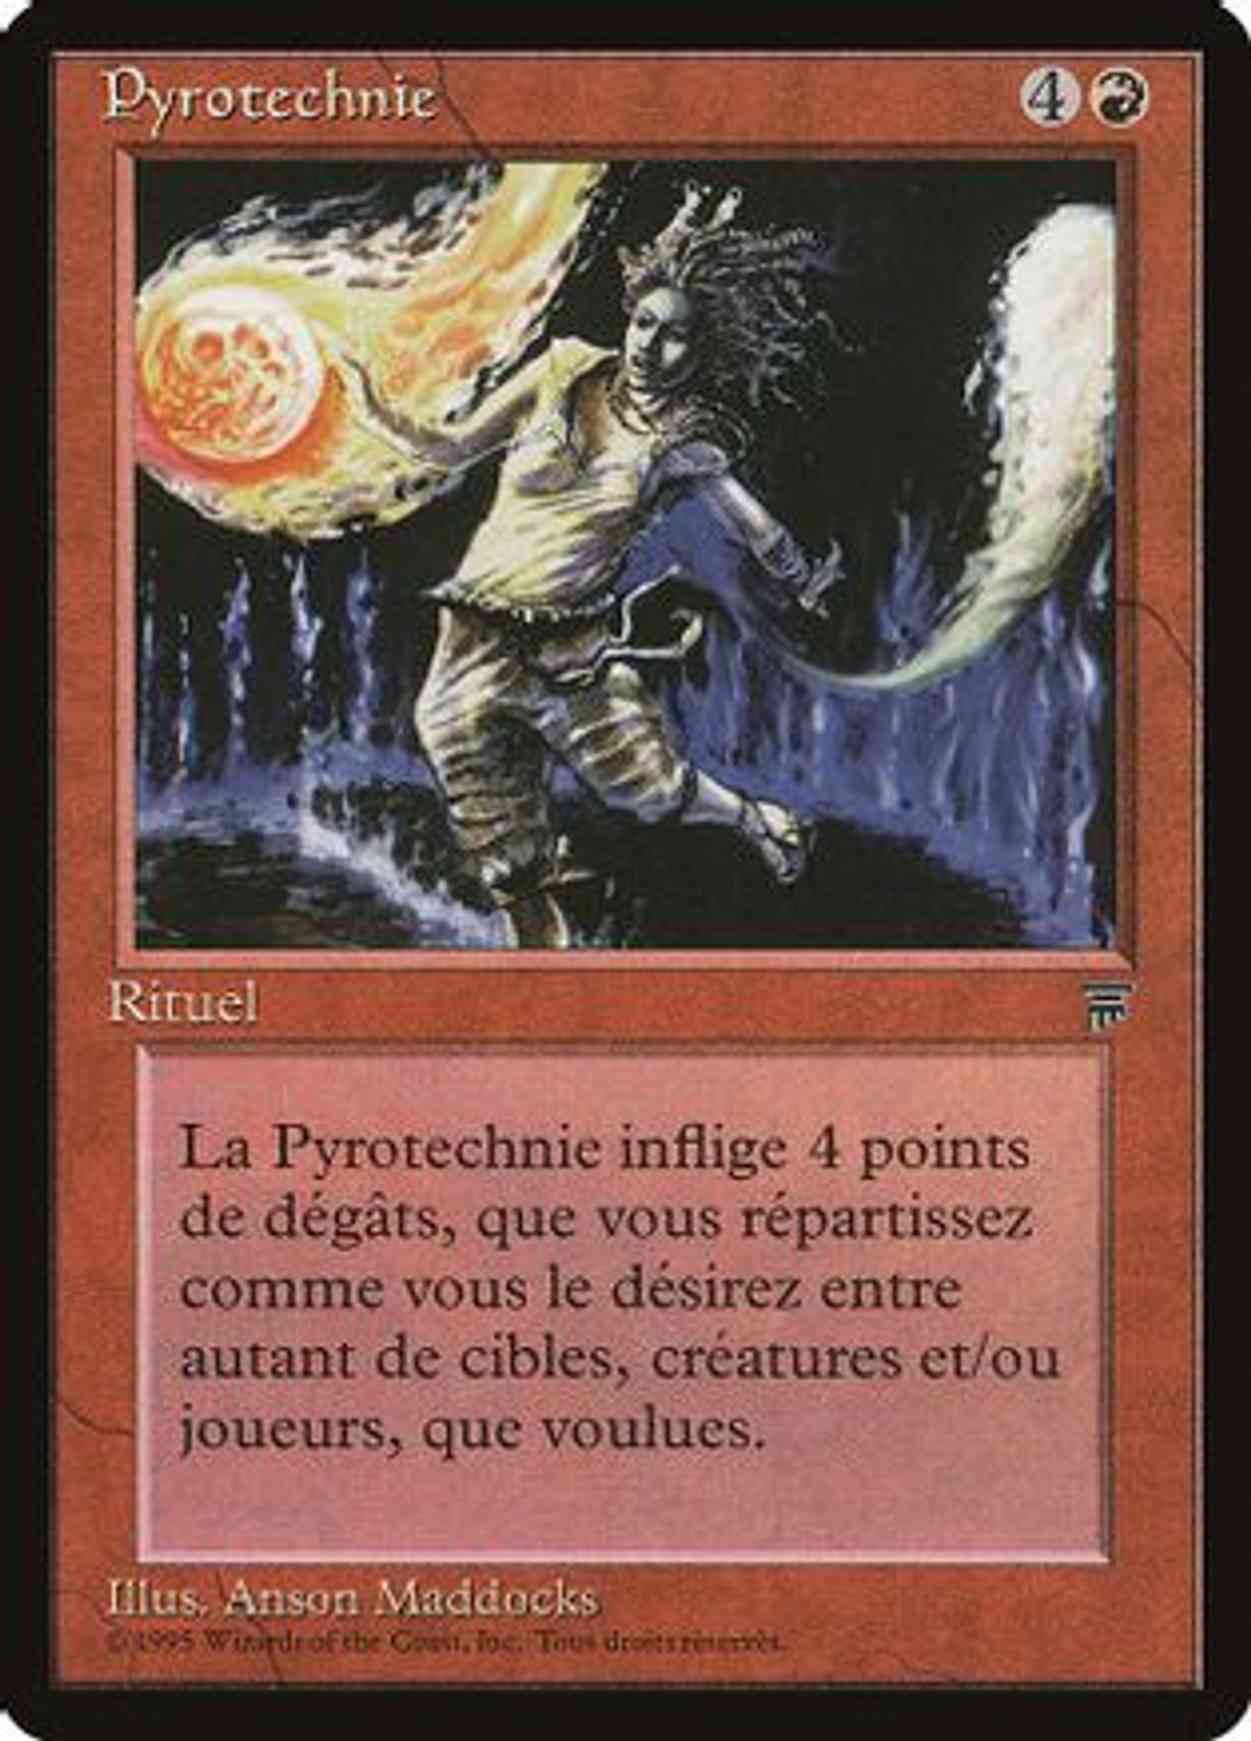 Pyrotechnics (French) - "Pyrotechnie" magic card front